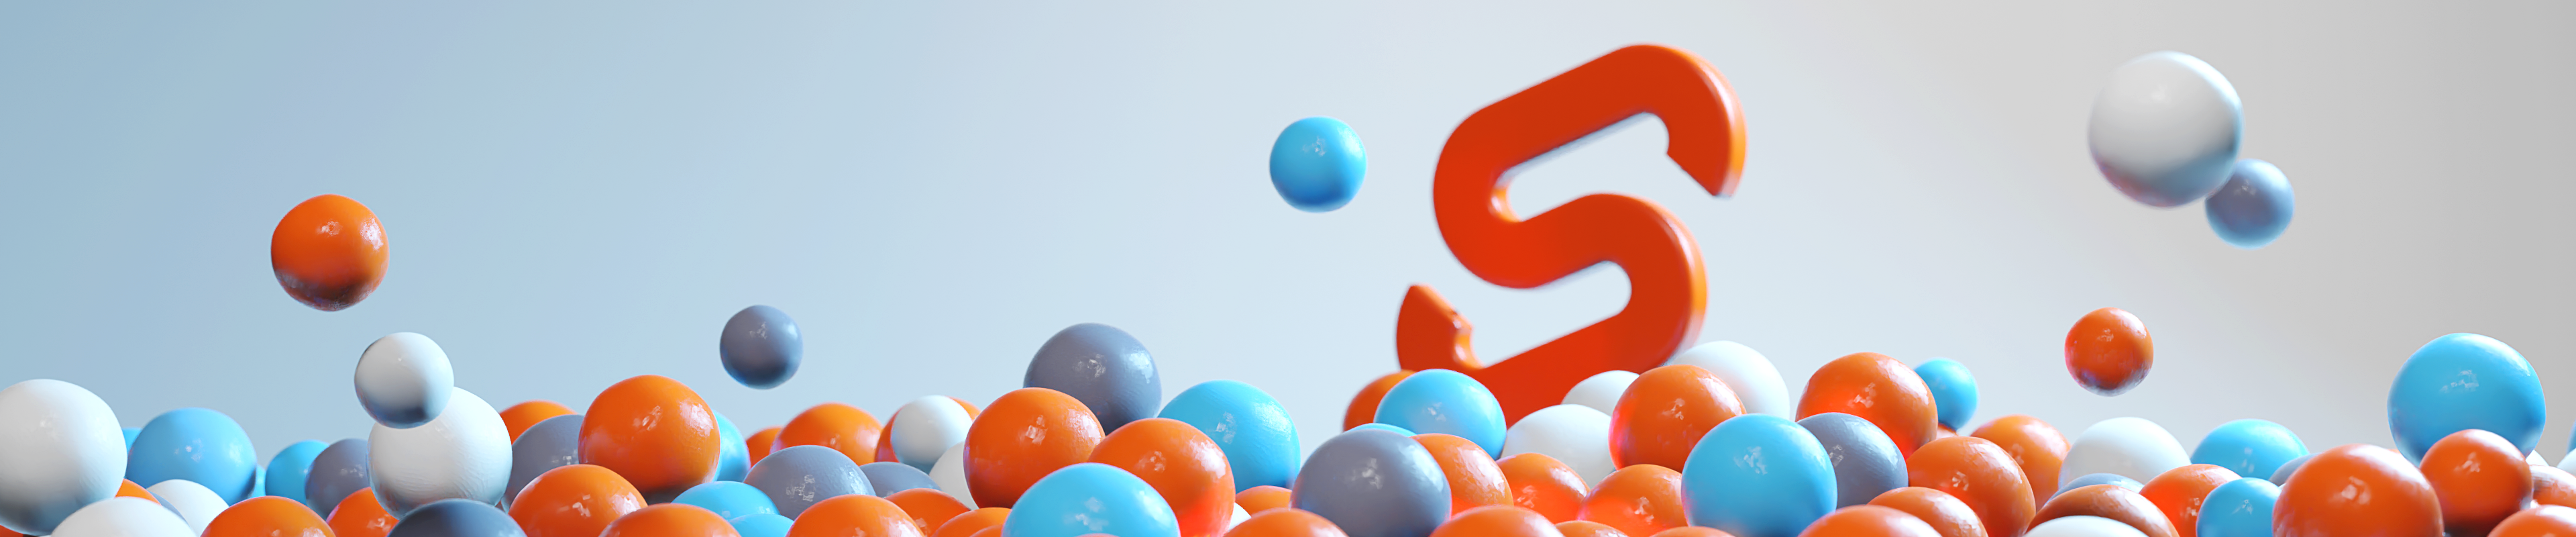 The Svelte logo in a ball pit